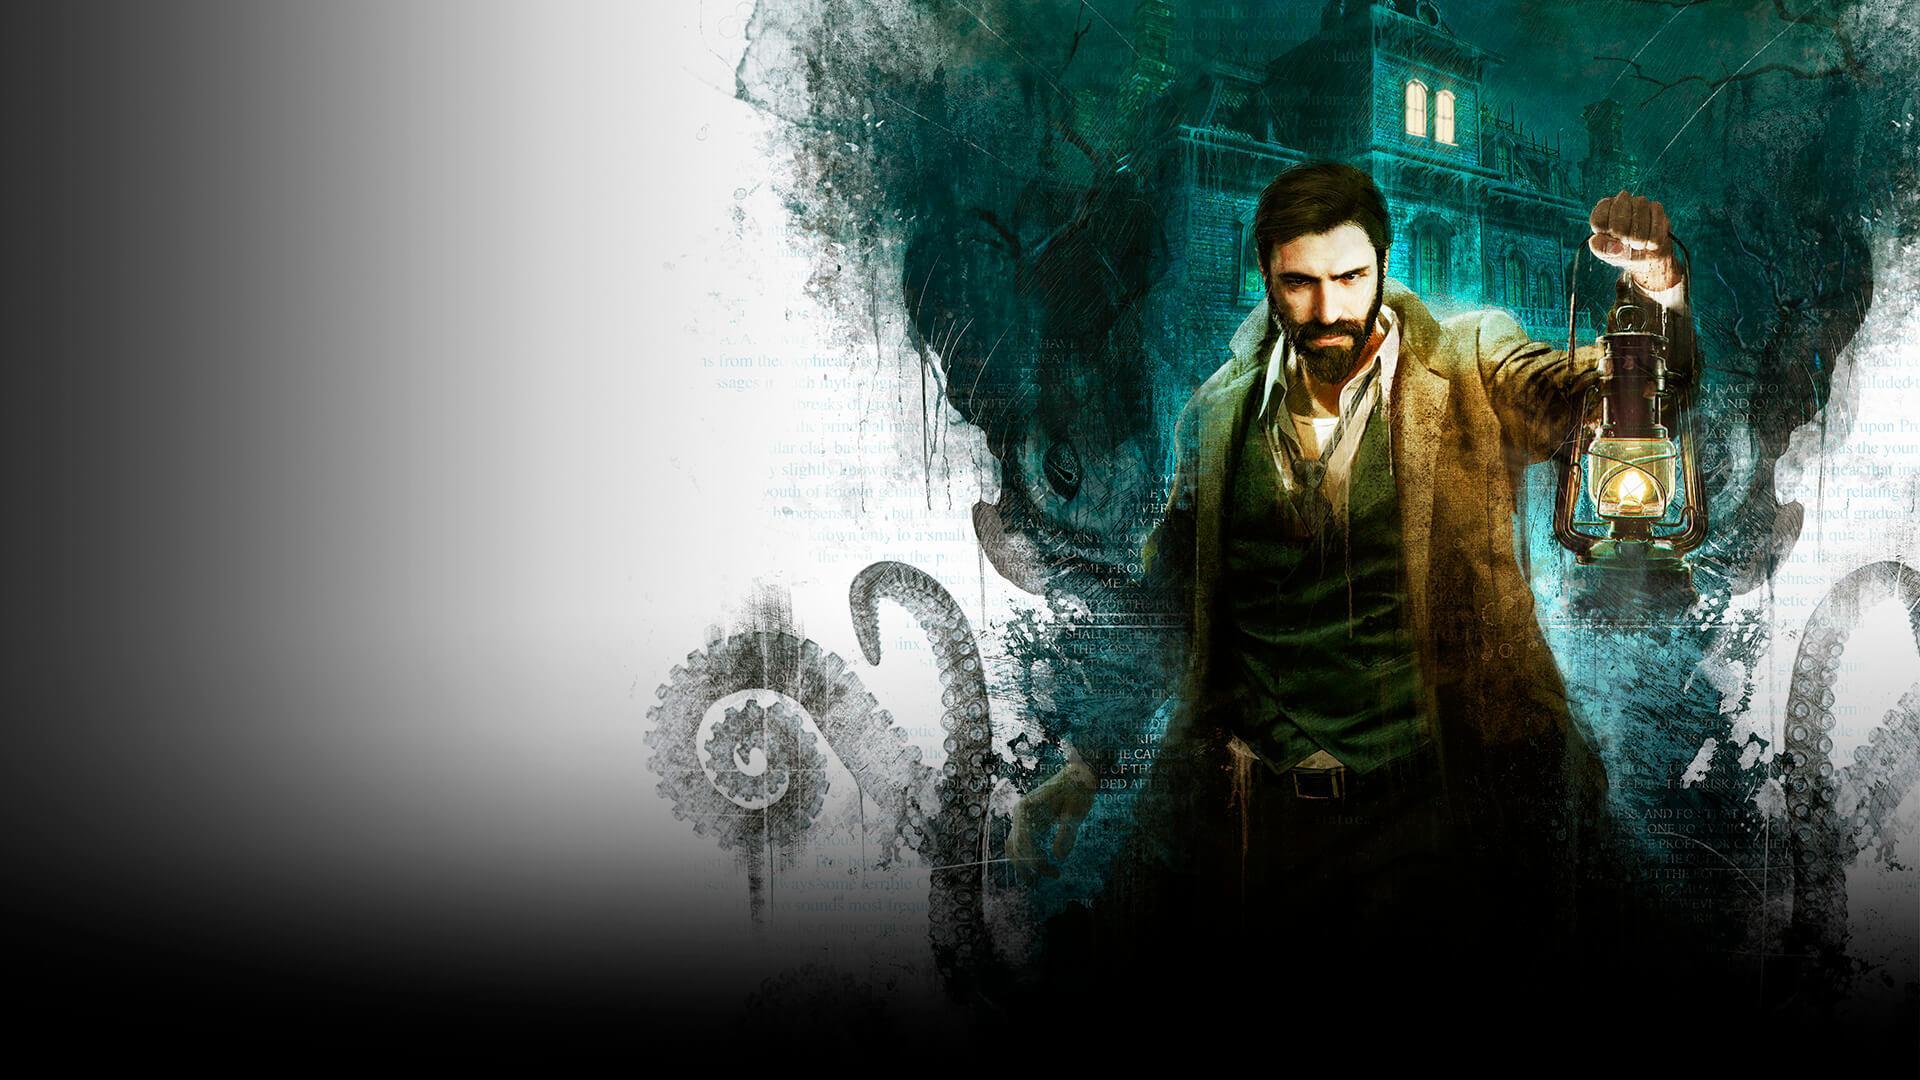 HD wallpaper, Call Of Cthulhu  The Official Video Game Hd